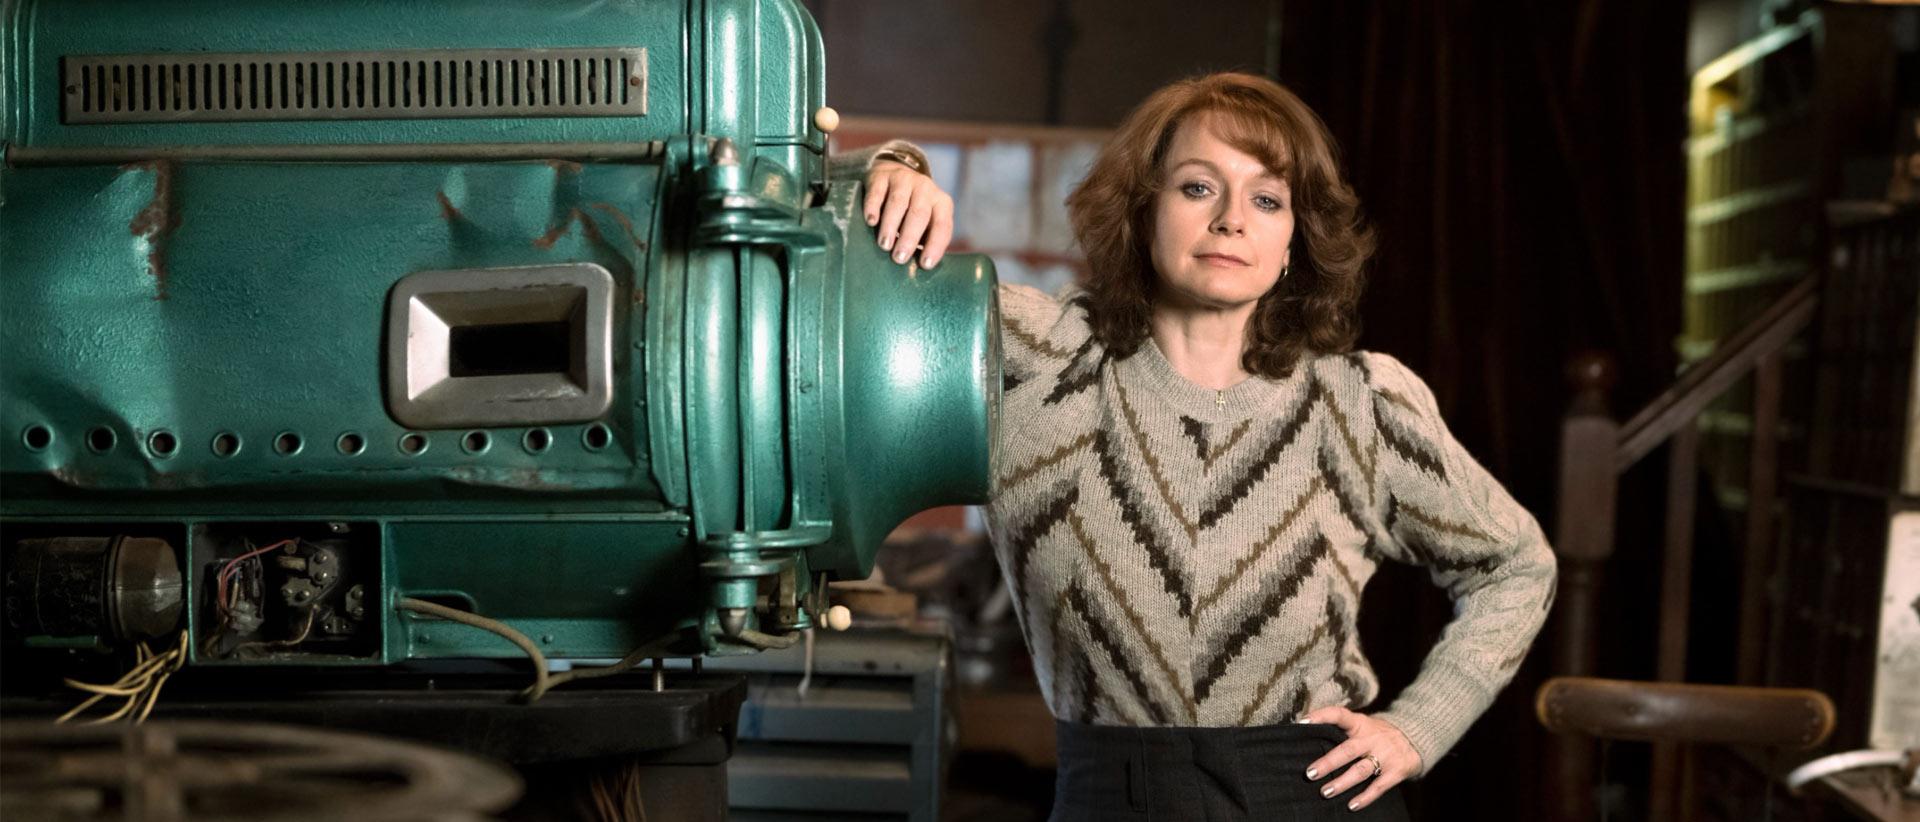 samantha morton in save the cinema standing next to an old cinema projector